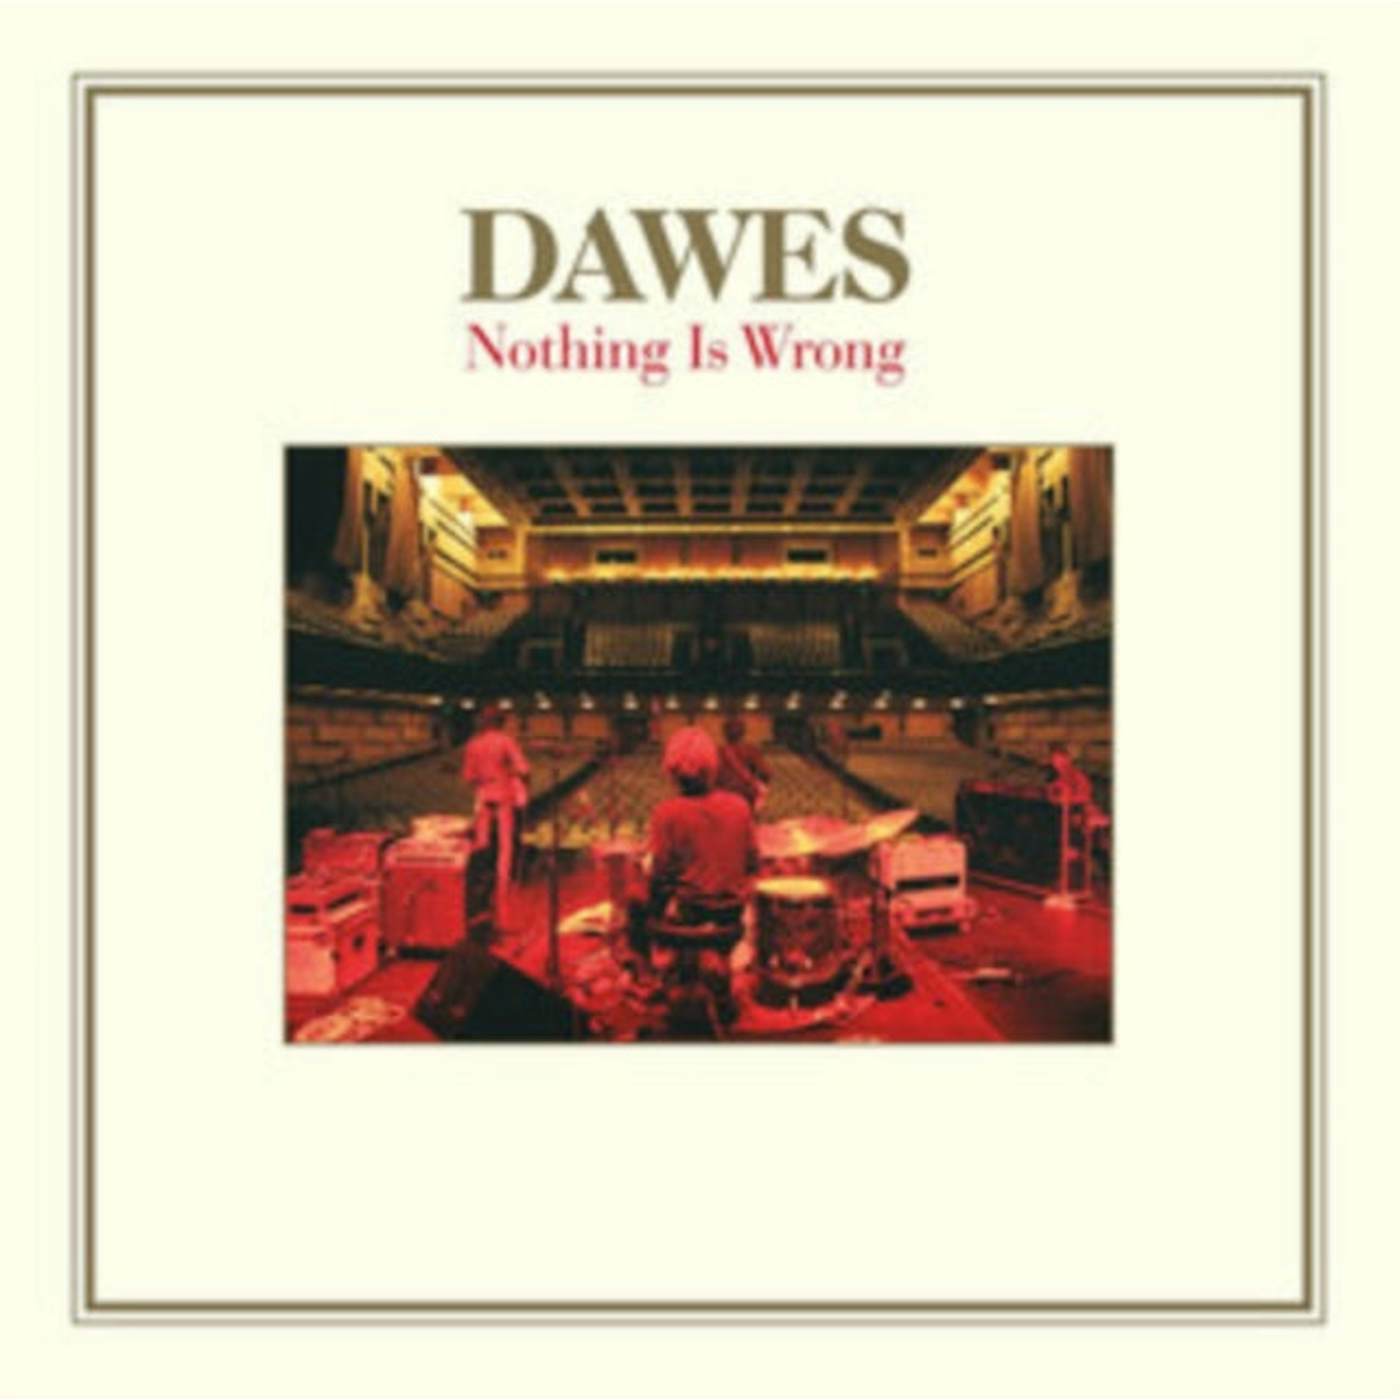 Dawes LP Vinyl Record - Nothing Is Wrong (10 th Anniversary Deluxe Edition) (Orange/Blue Vinyl)